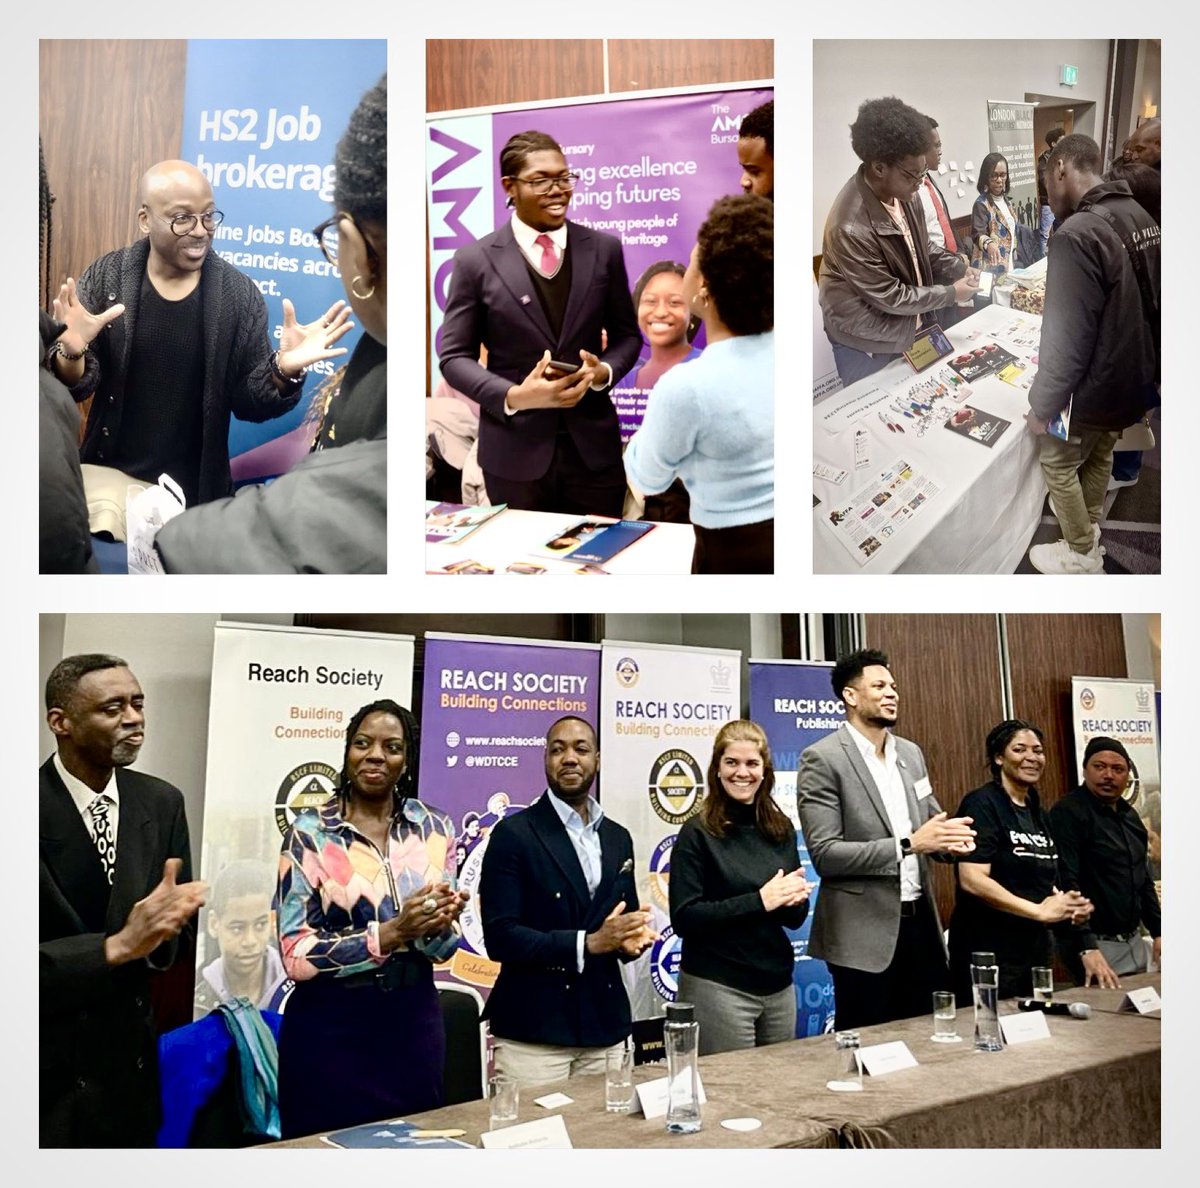 WOW!!!! Our Annual Careers Conference earlier this week attracted 1,000 attendees making connections with educationalists, companies and professionals ALL offering support on pathways to success. MORE about our upcoming activities via reachsociety.com #BuildingConnections